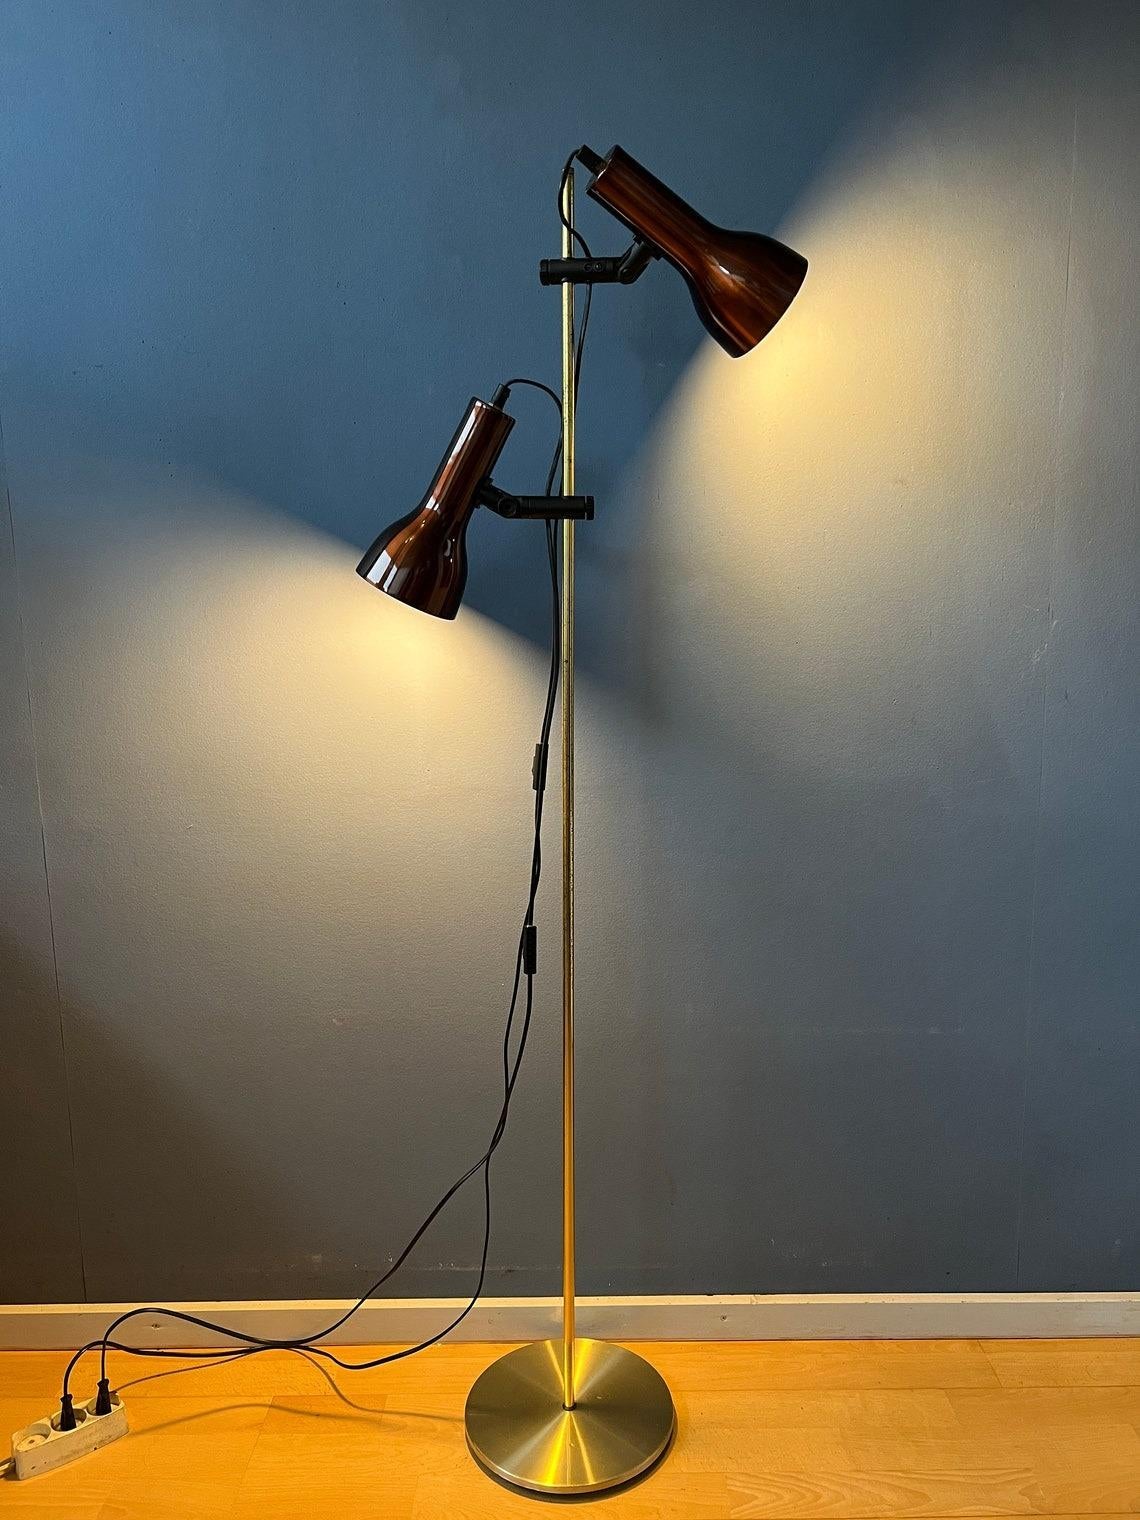 A space age floor lamp with two bourdeaux red spots. The spots can be turned in any direction desirable and move up and down the base. The spots can be switched on simultaneously or separately. The lamp requires two E27/26 lightbulbs.

Additional